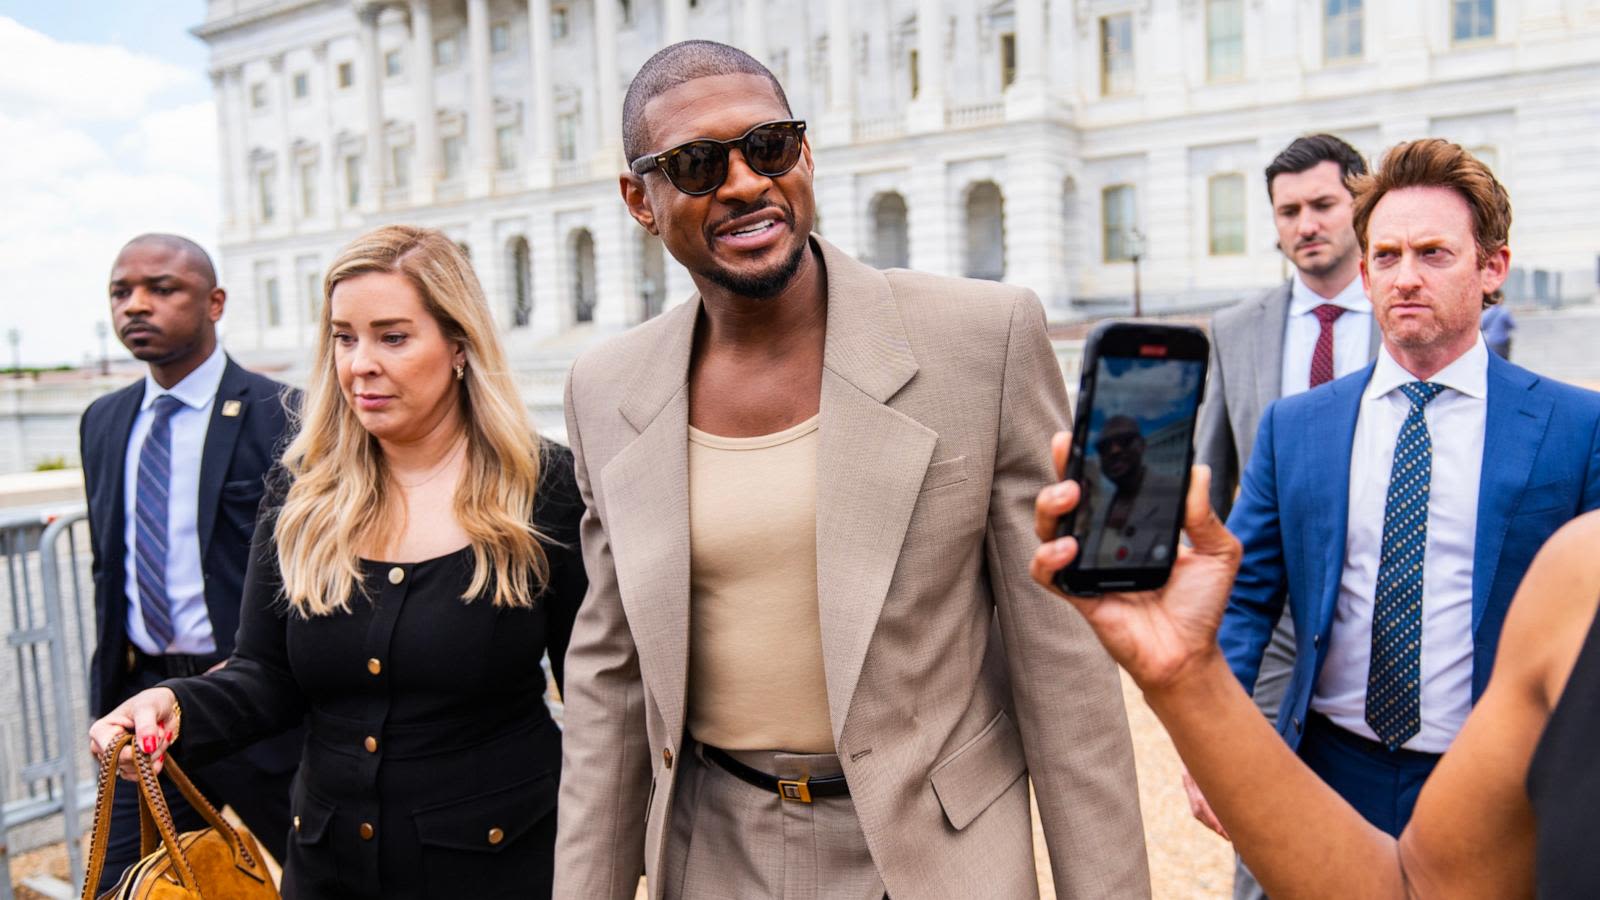 Usher advocates for diabetes awareness at Capitol Hill